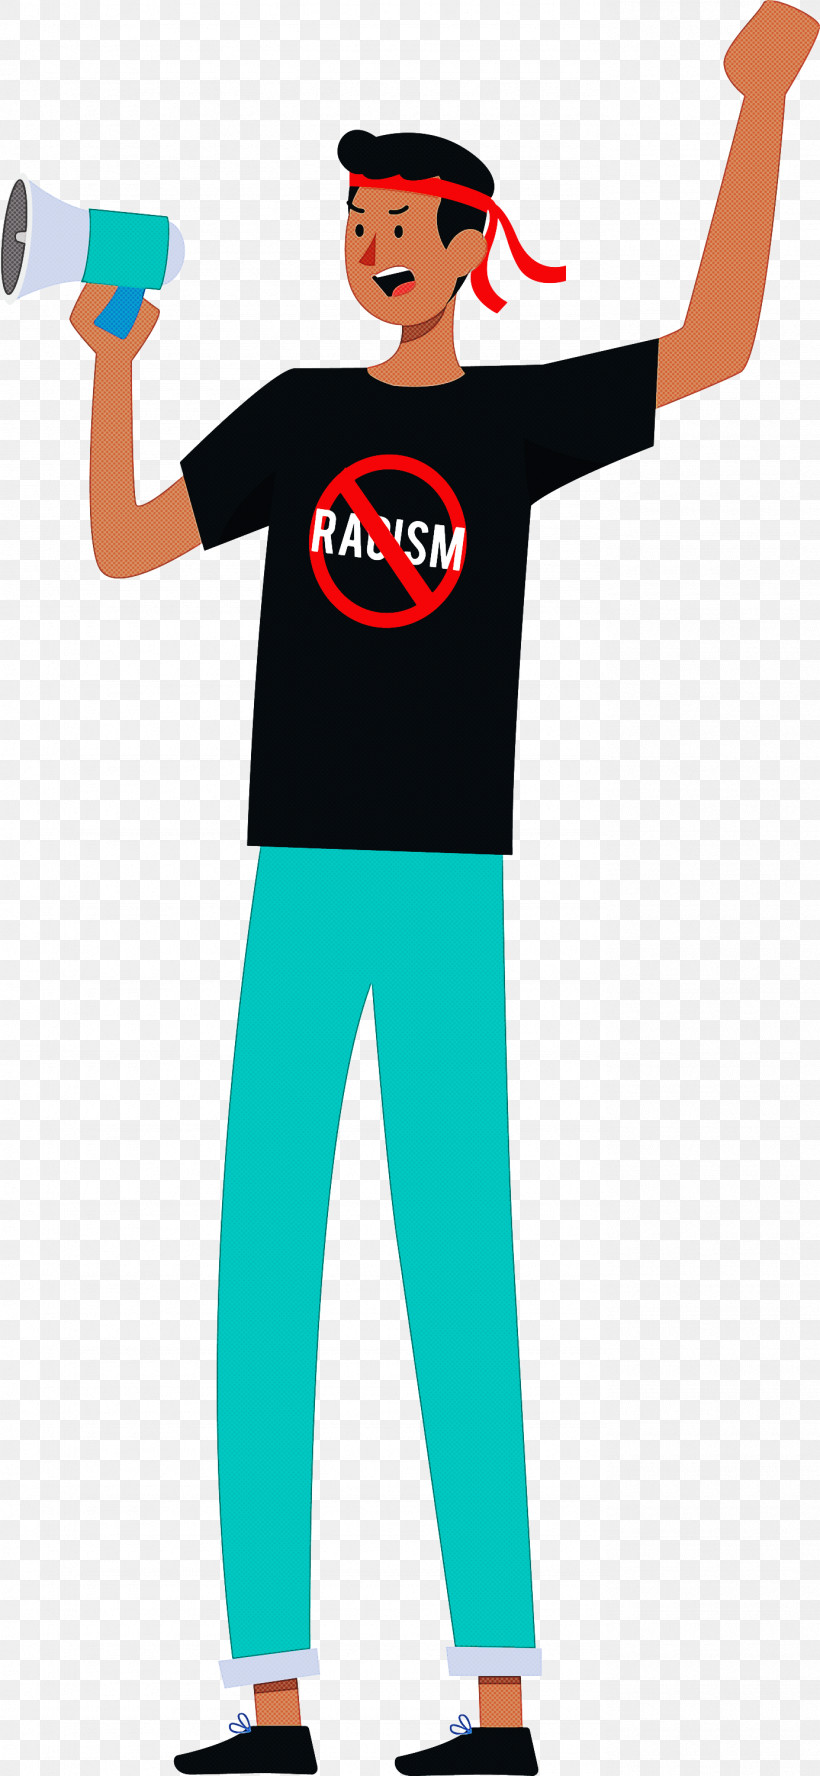 STOP RACISM, PNG, 1385x3000px, Stop Racism, Book Illustration, Cartoon, Flat Design, Infographic Download Free